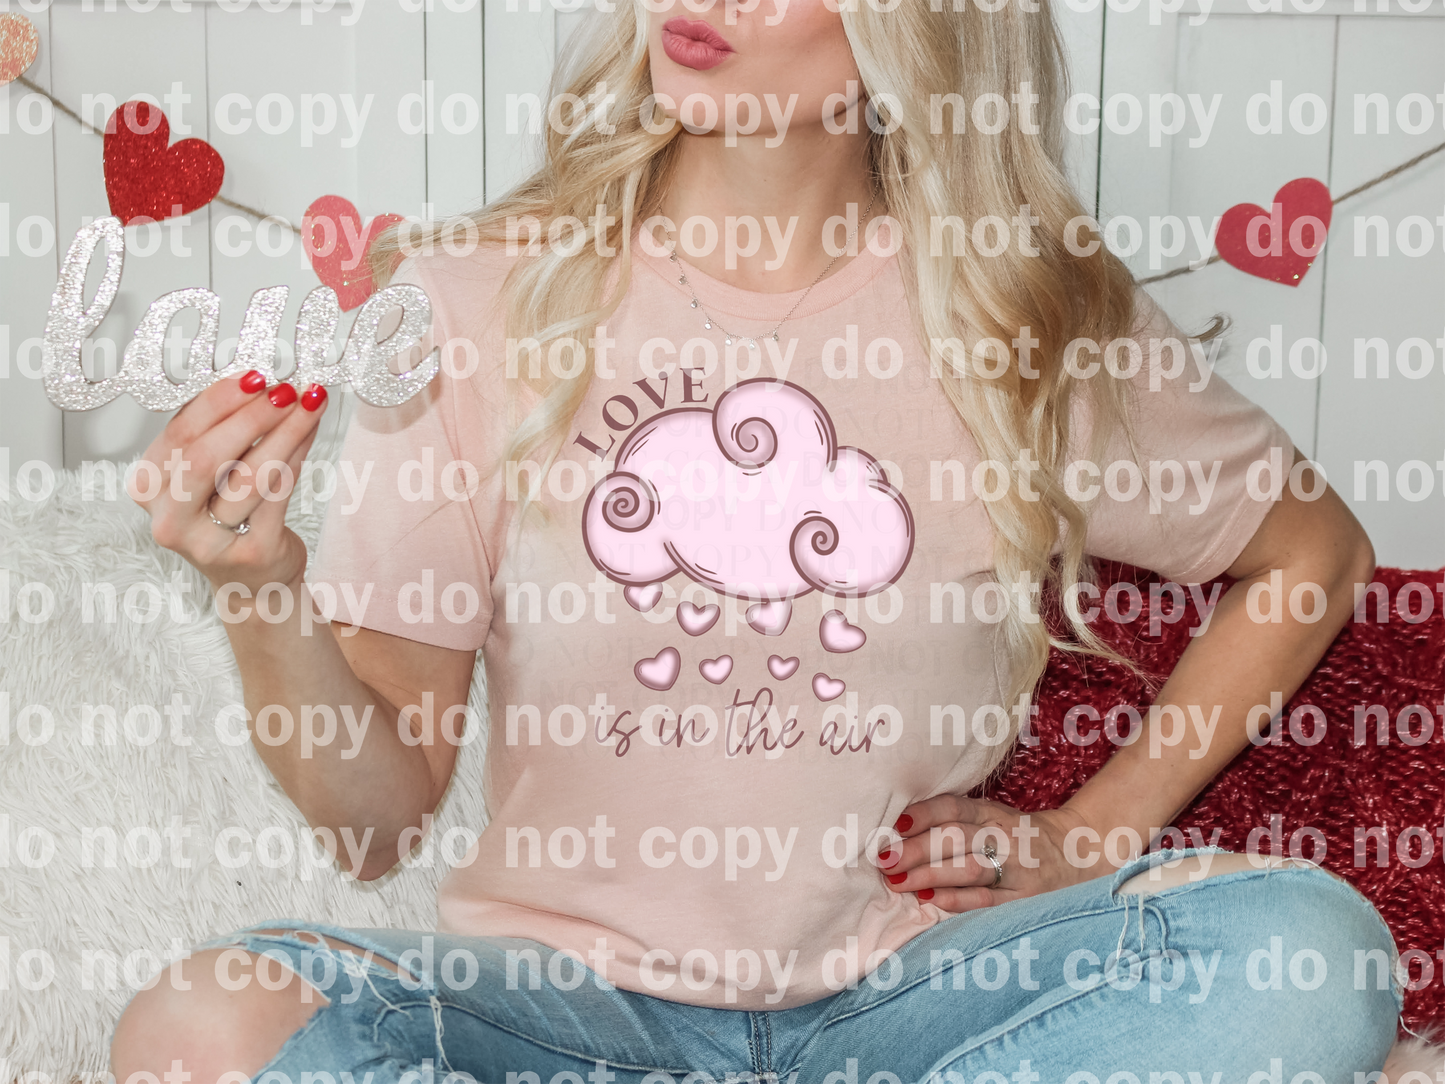 Love Is In the Air Full Color/One Color Dream Print or Sublimation Print